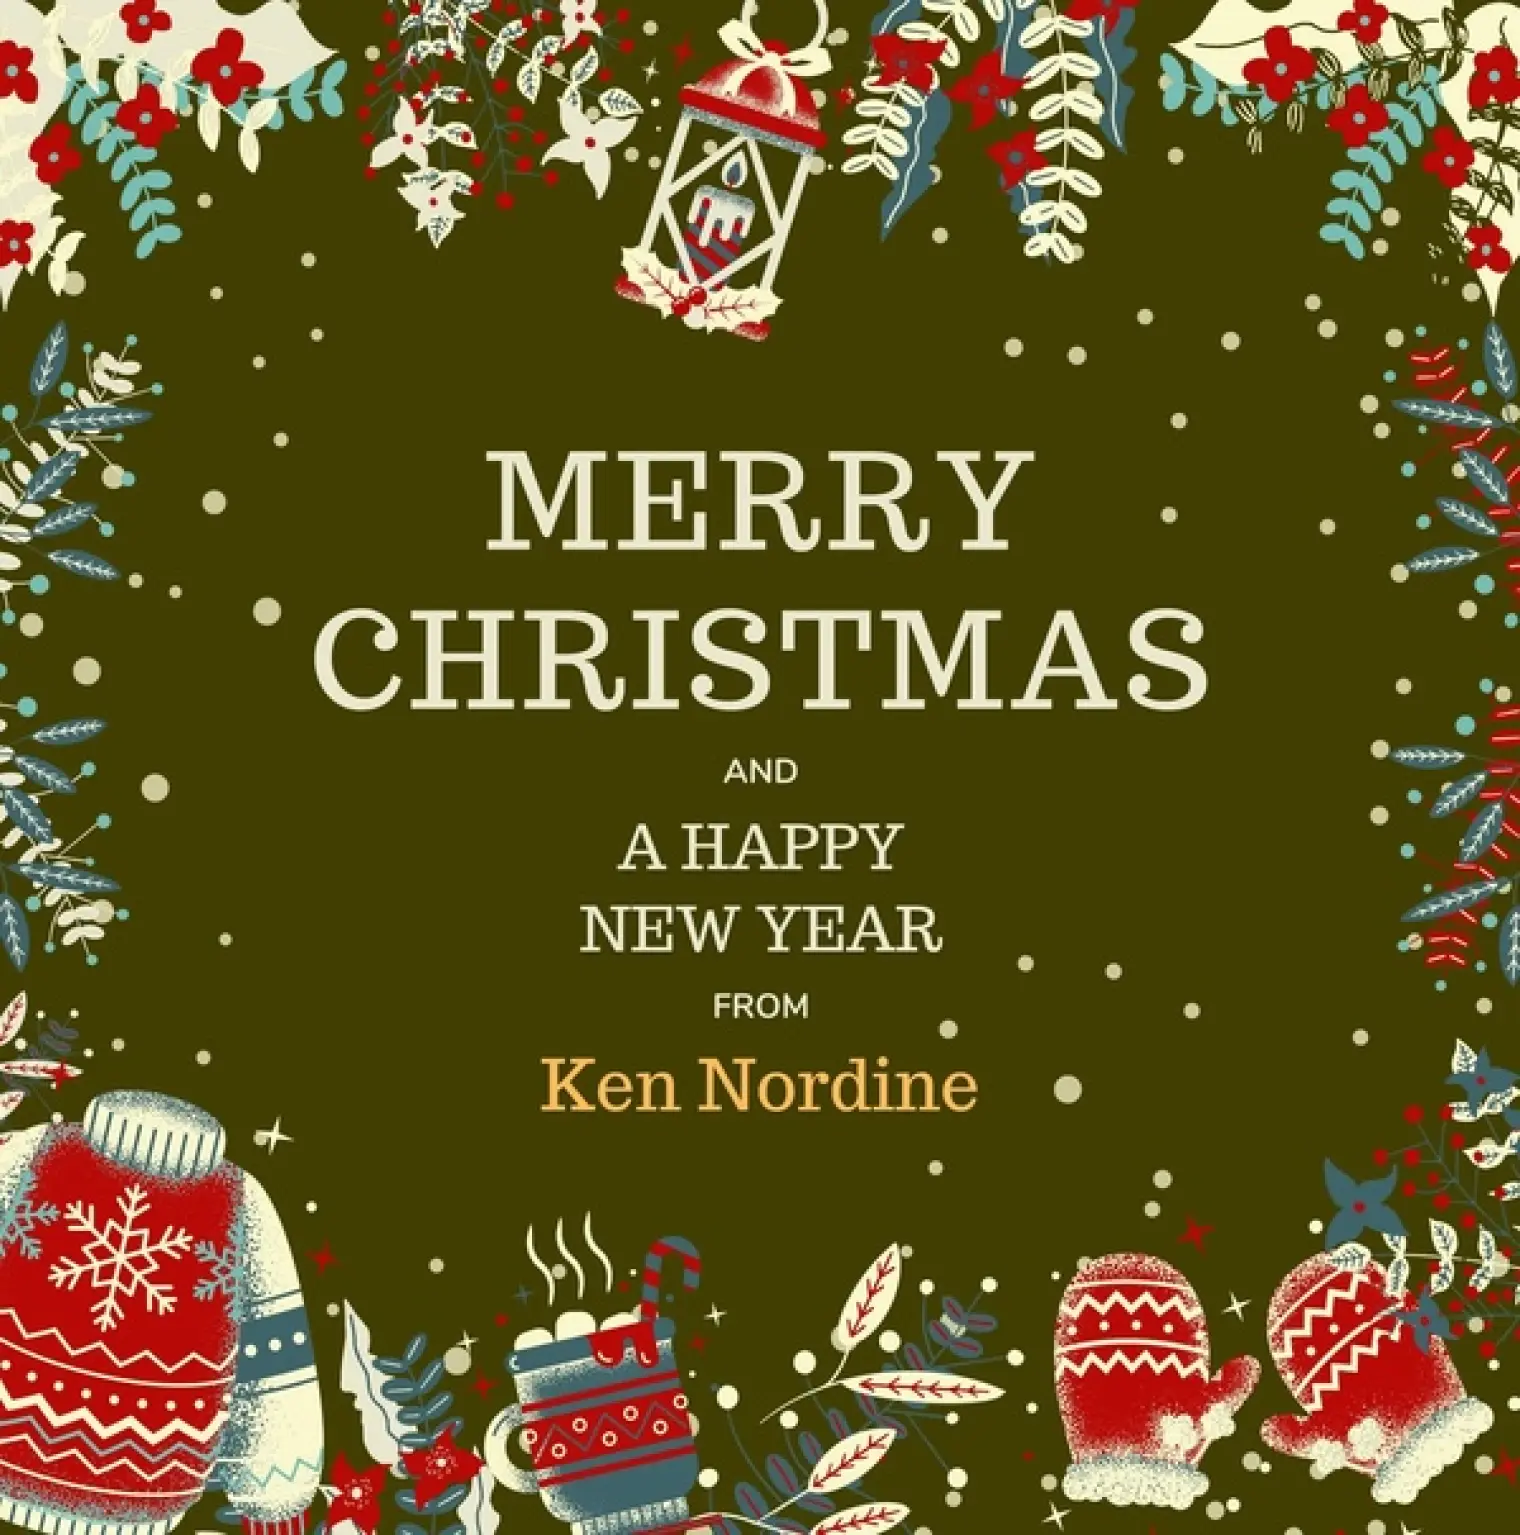 Merry Christmas and A Happy New Year from Ken Nordine -  Ken Nordine 